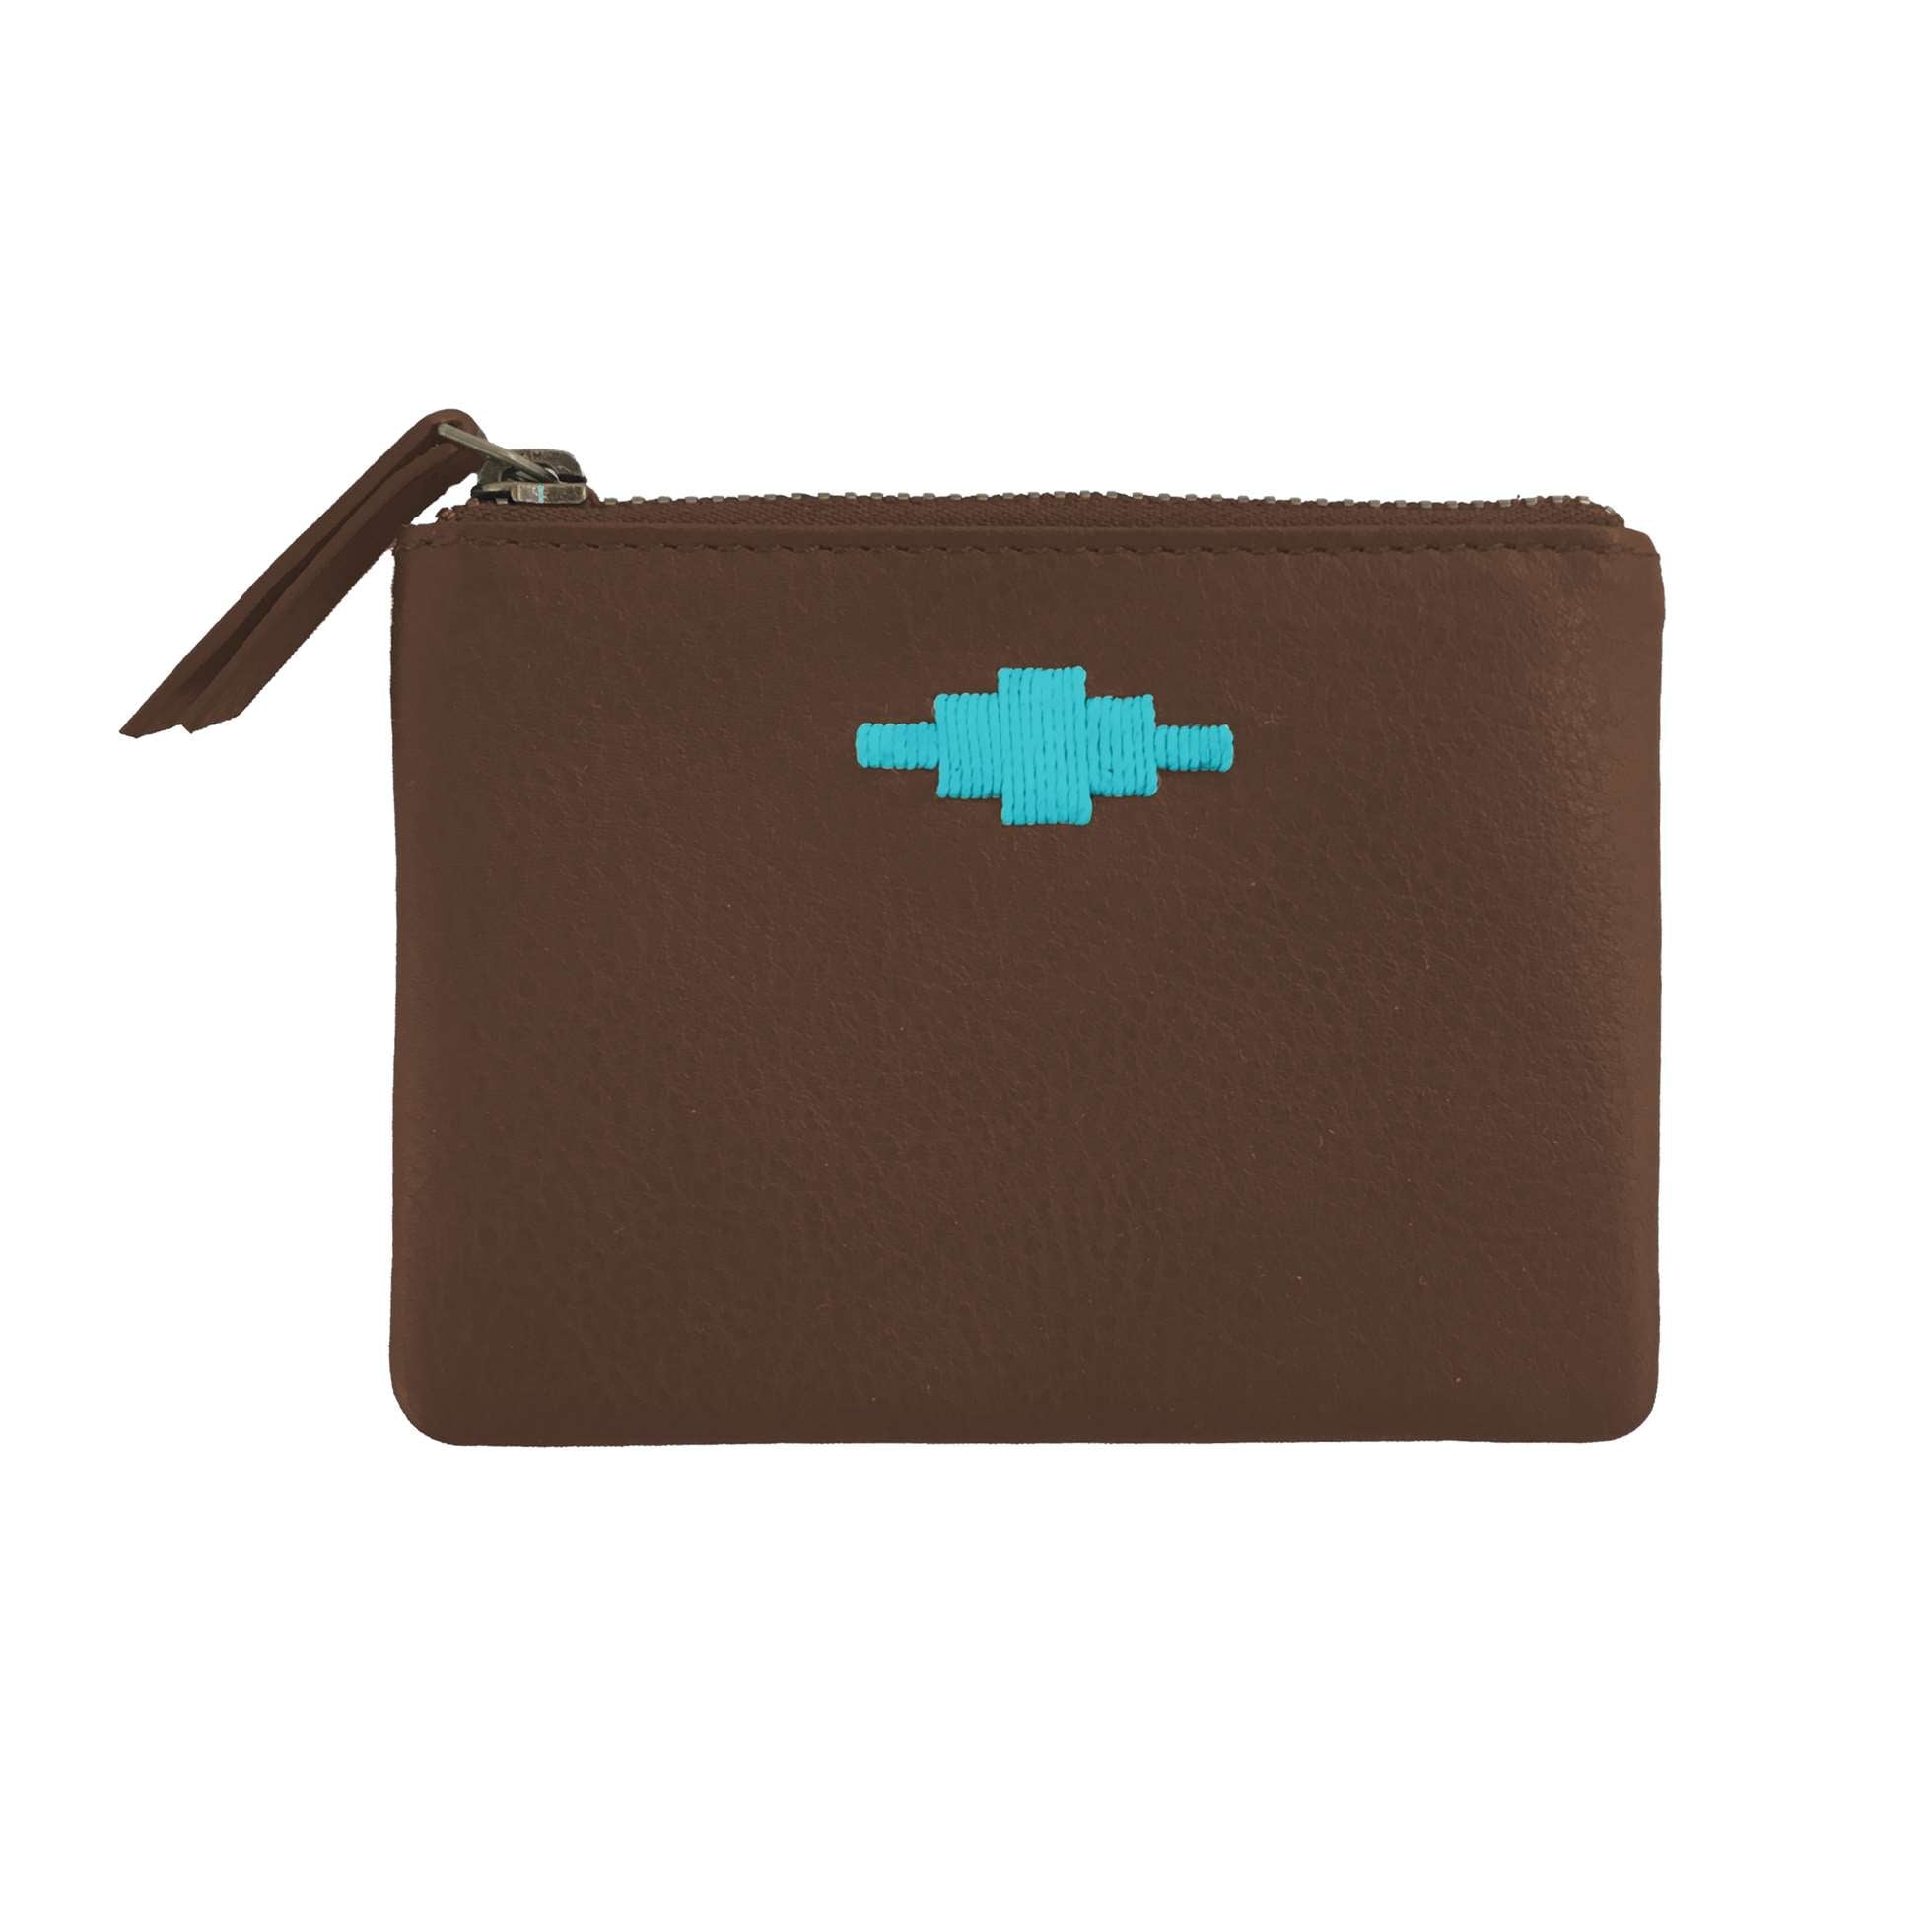 PAMPEANO - Cambio Pouch Purse - Brown Leather